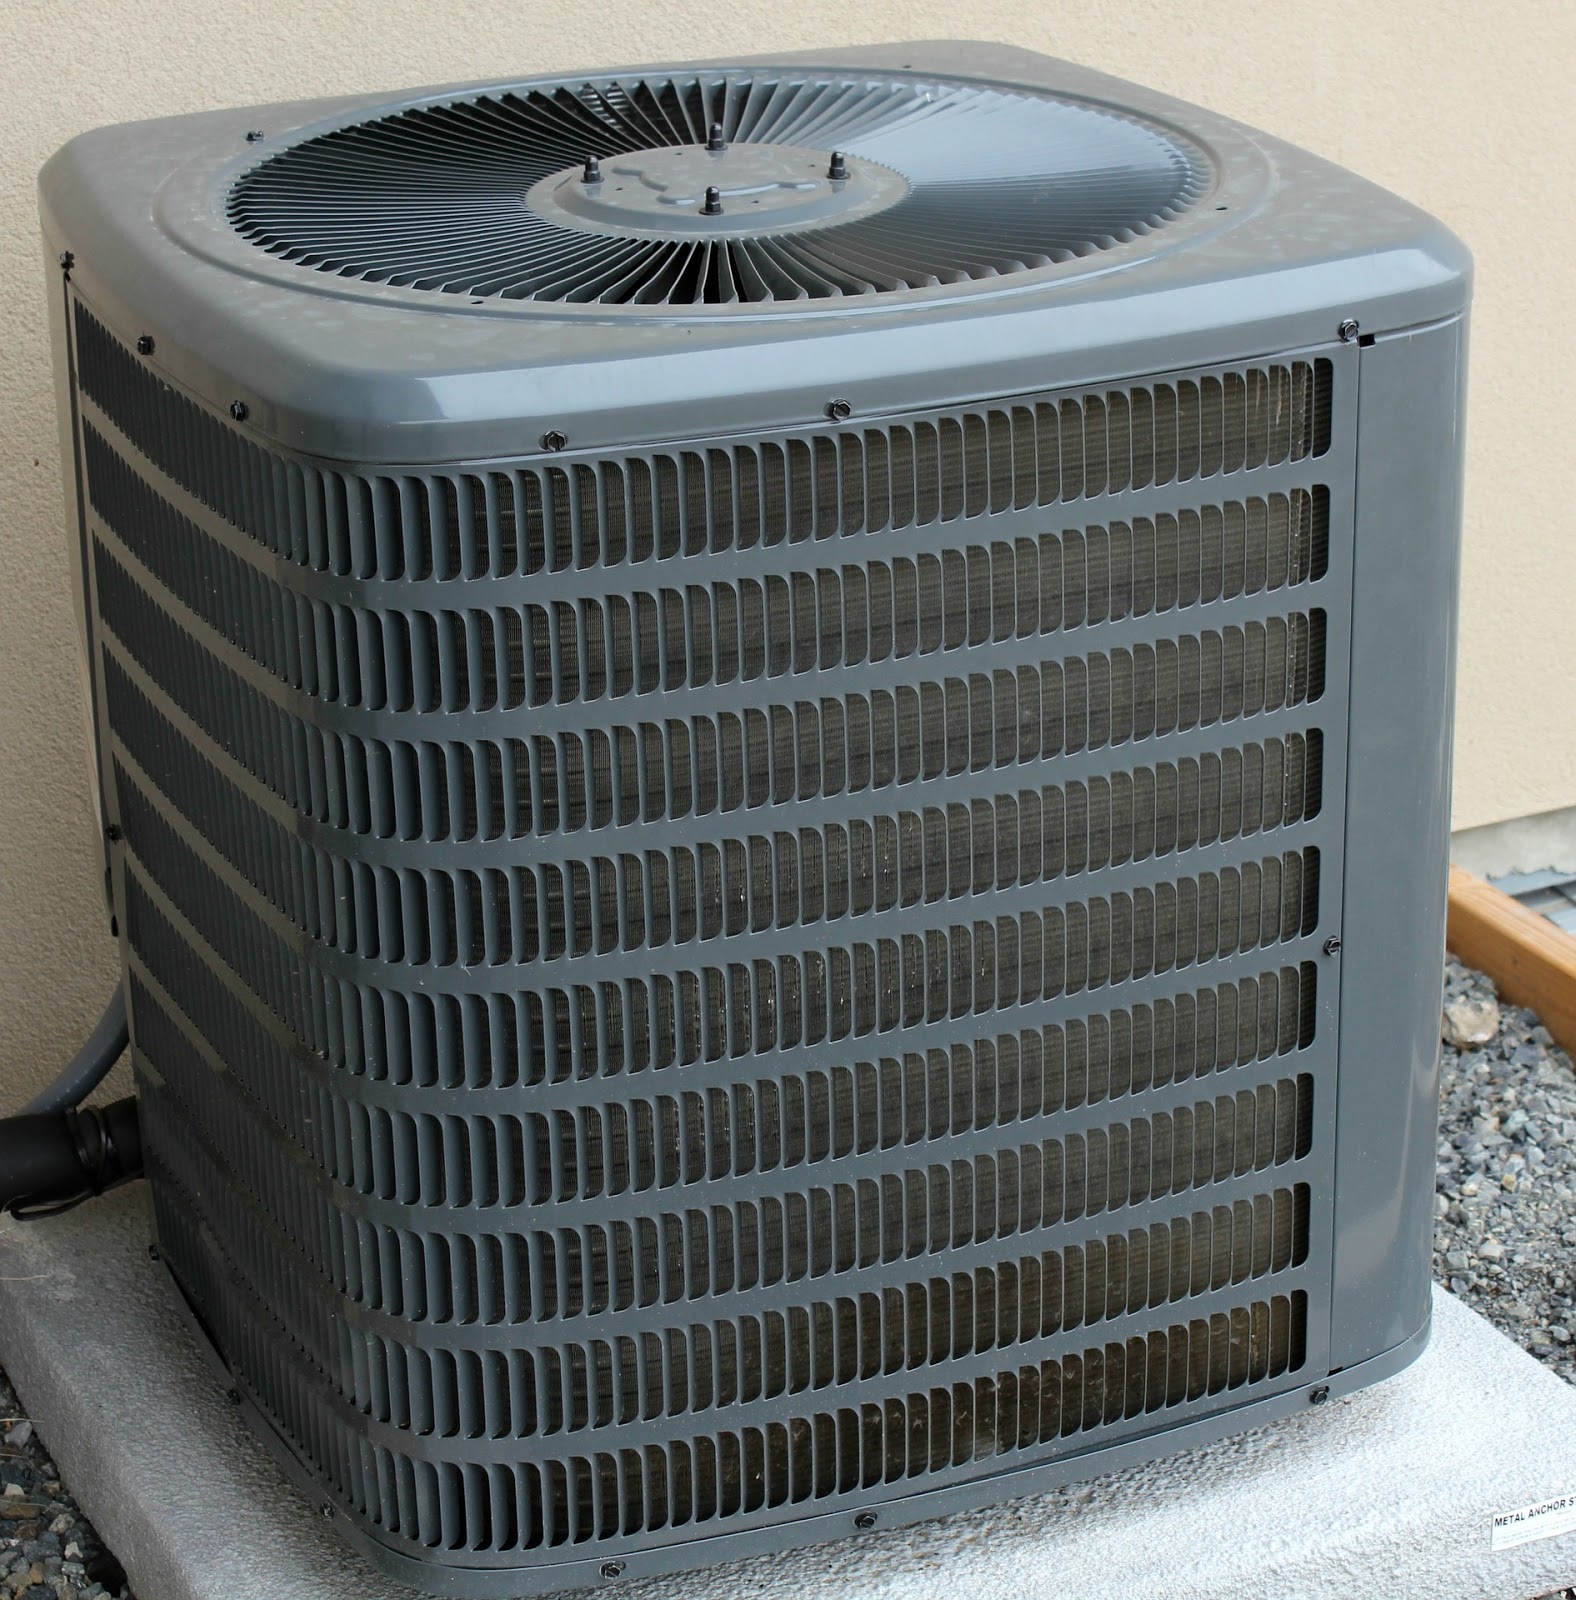 High Utility Bills? Here's Why Your HVAC System May Be the Reason